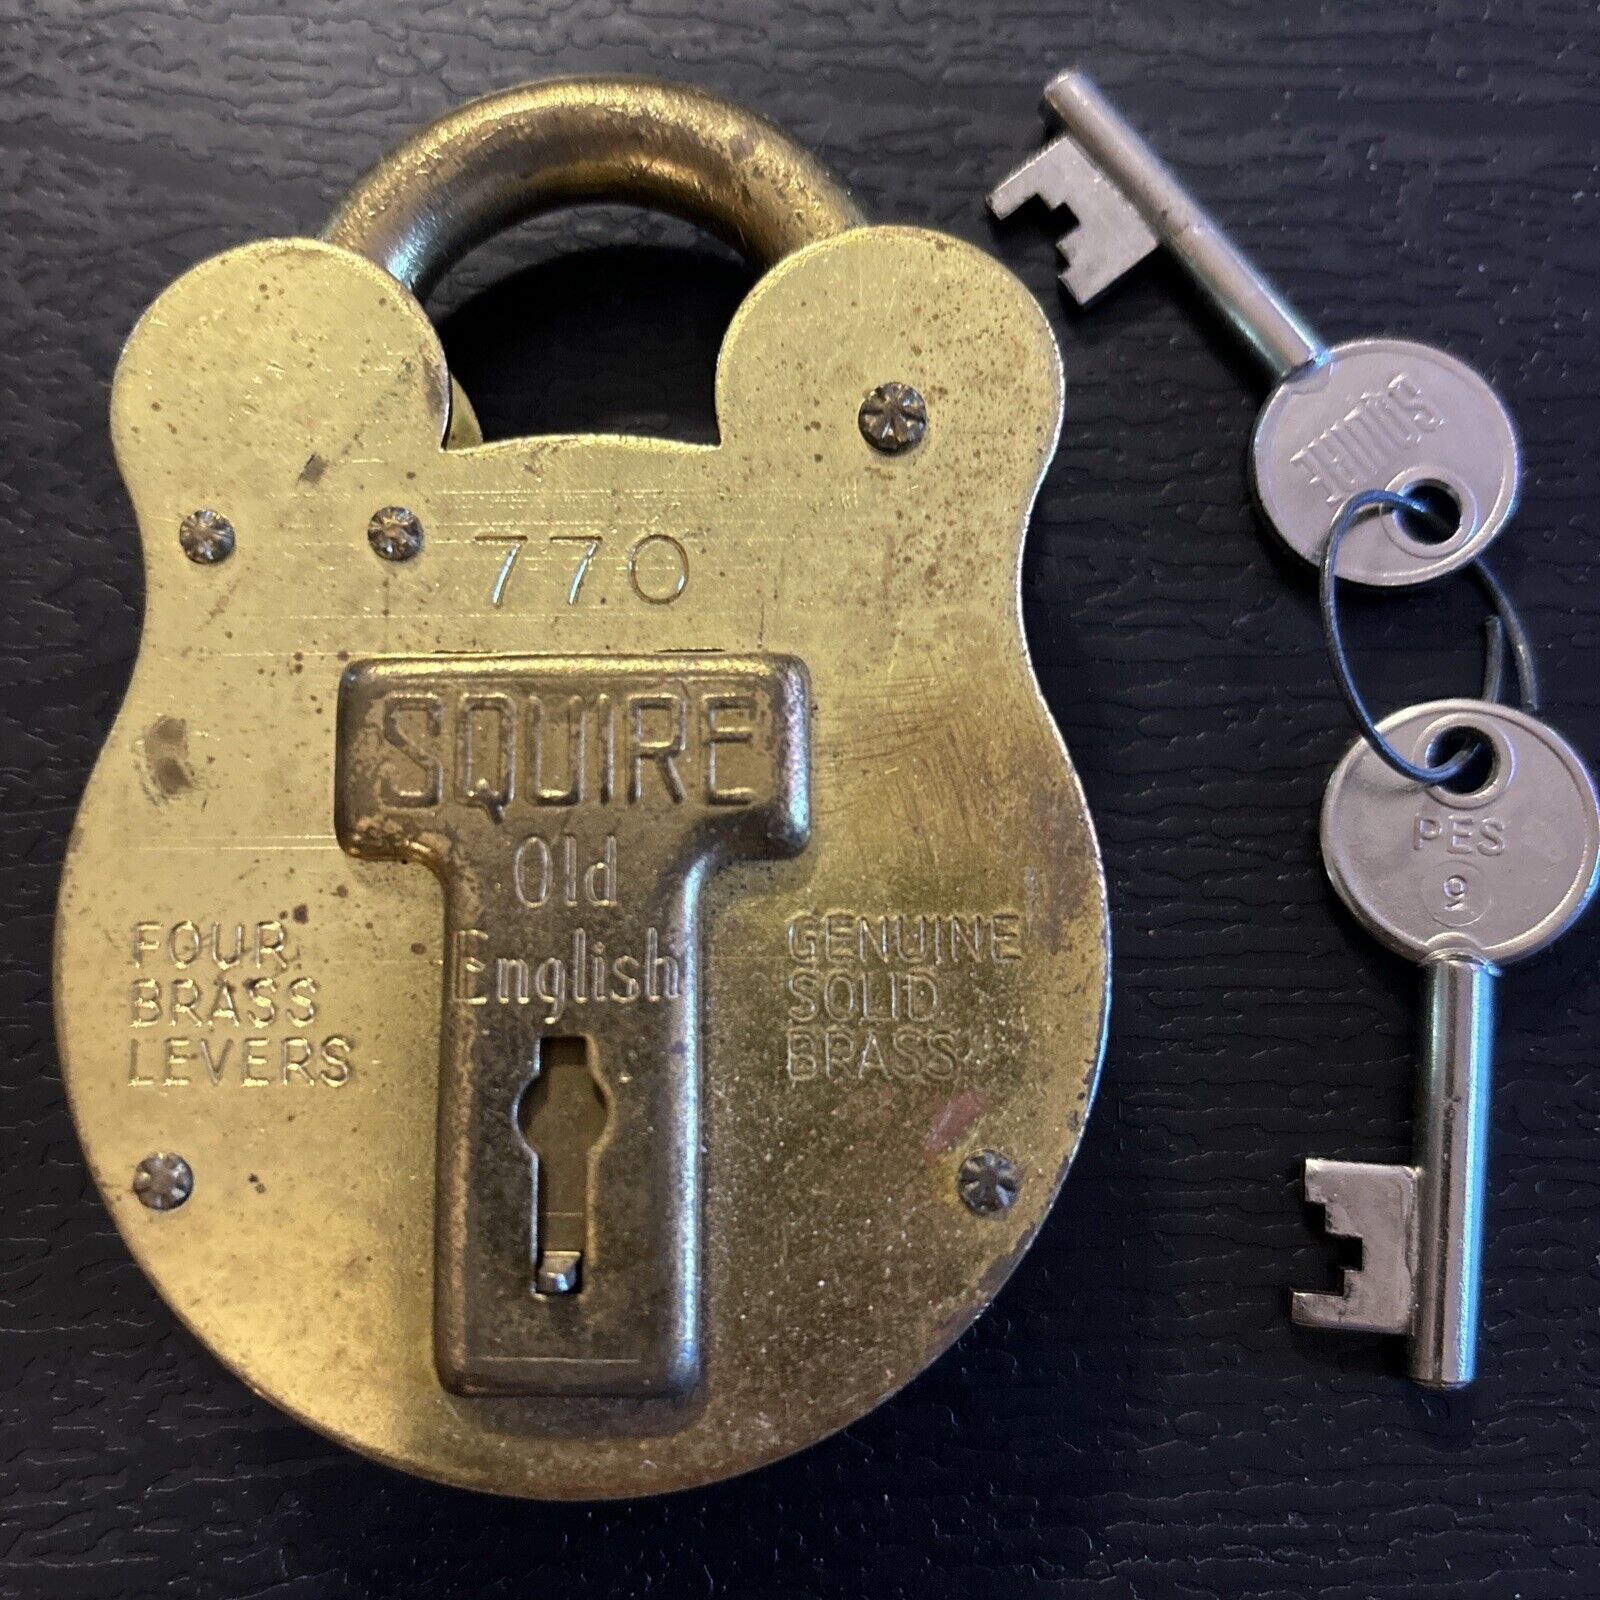 Vintage Made England Squire & Sons #770 Solid Brass Working Lock & Keys